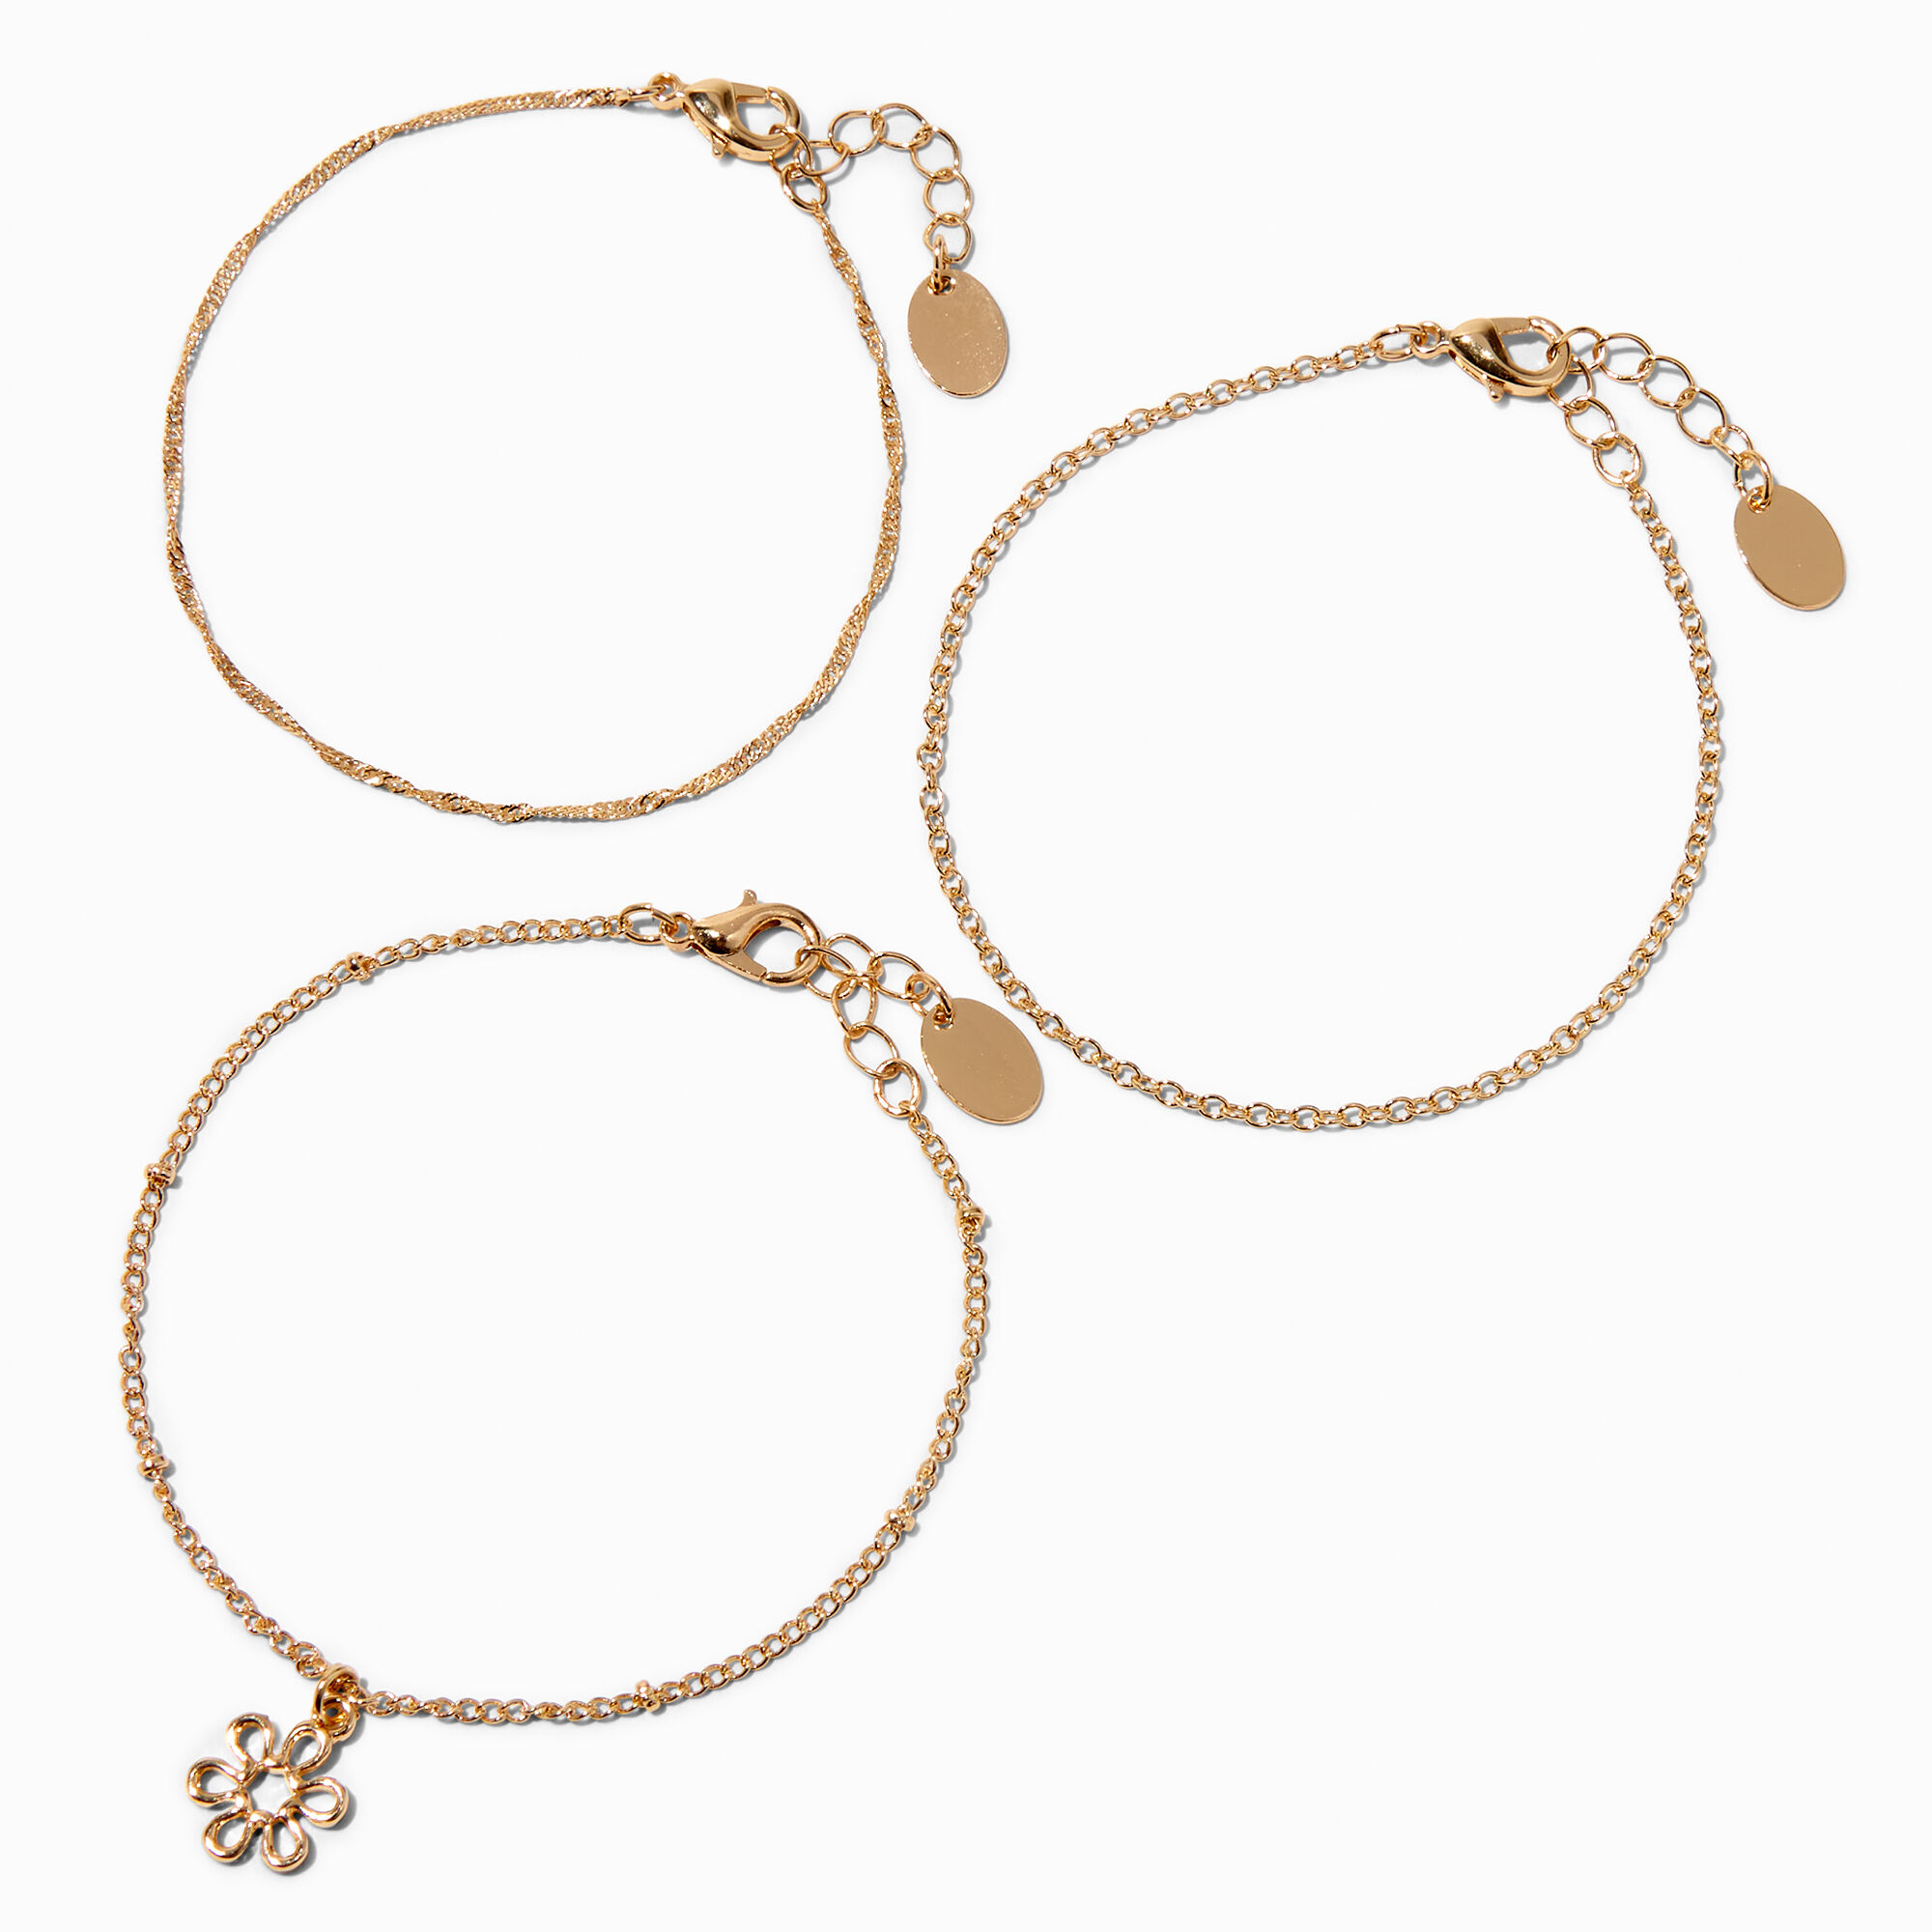 View Claires Recycled Jewelry Tone Daisy Chain Bracelets 3 Pack Gold information